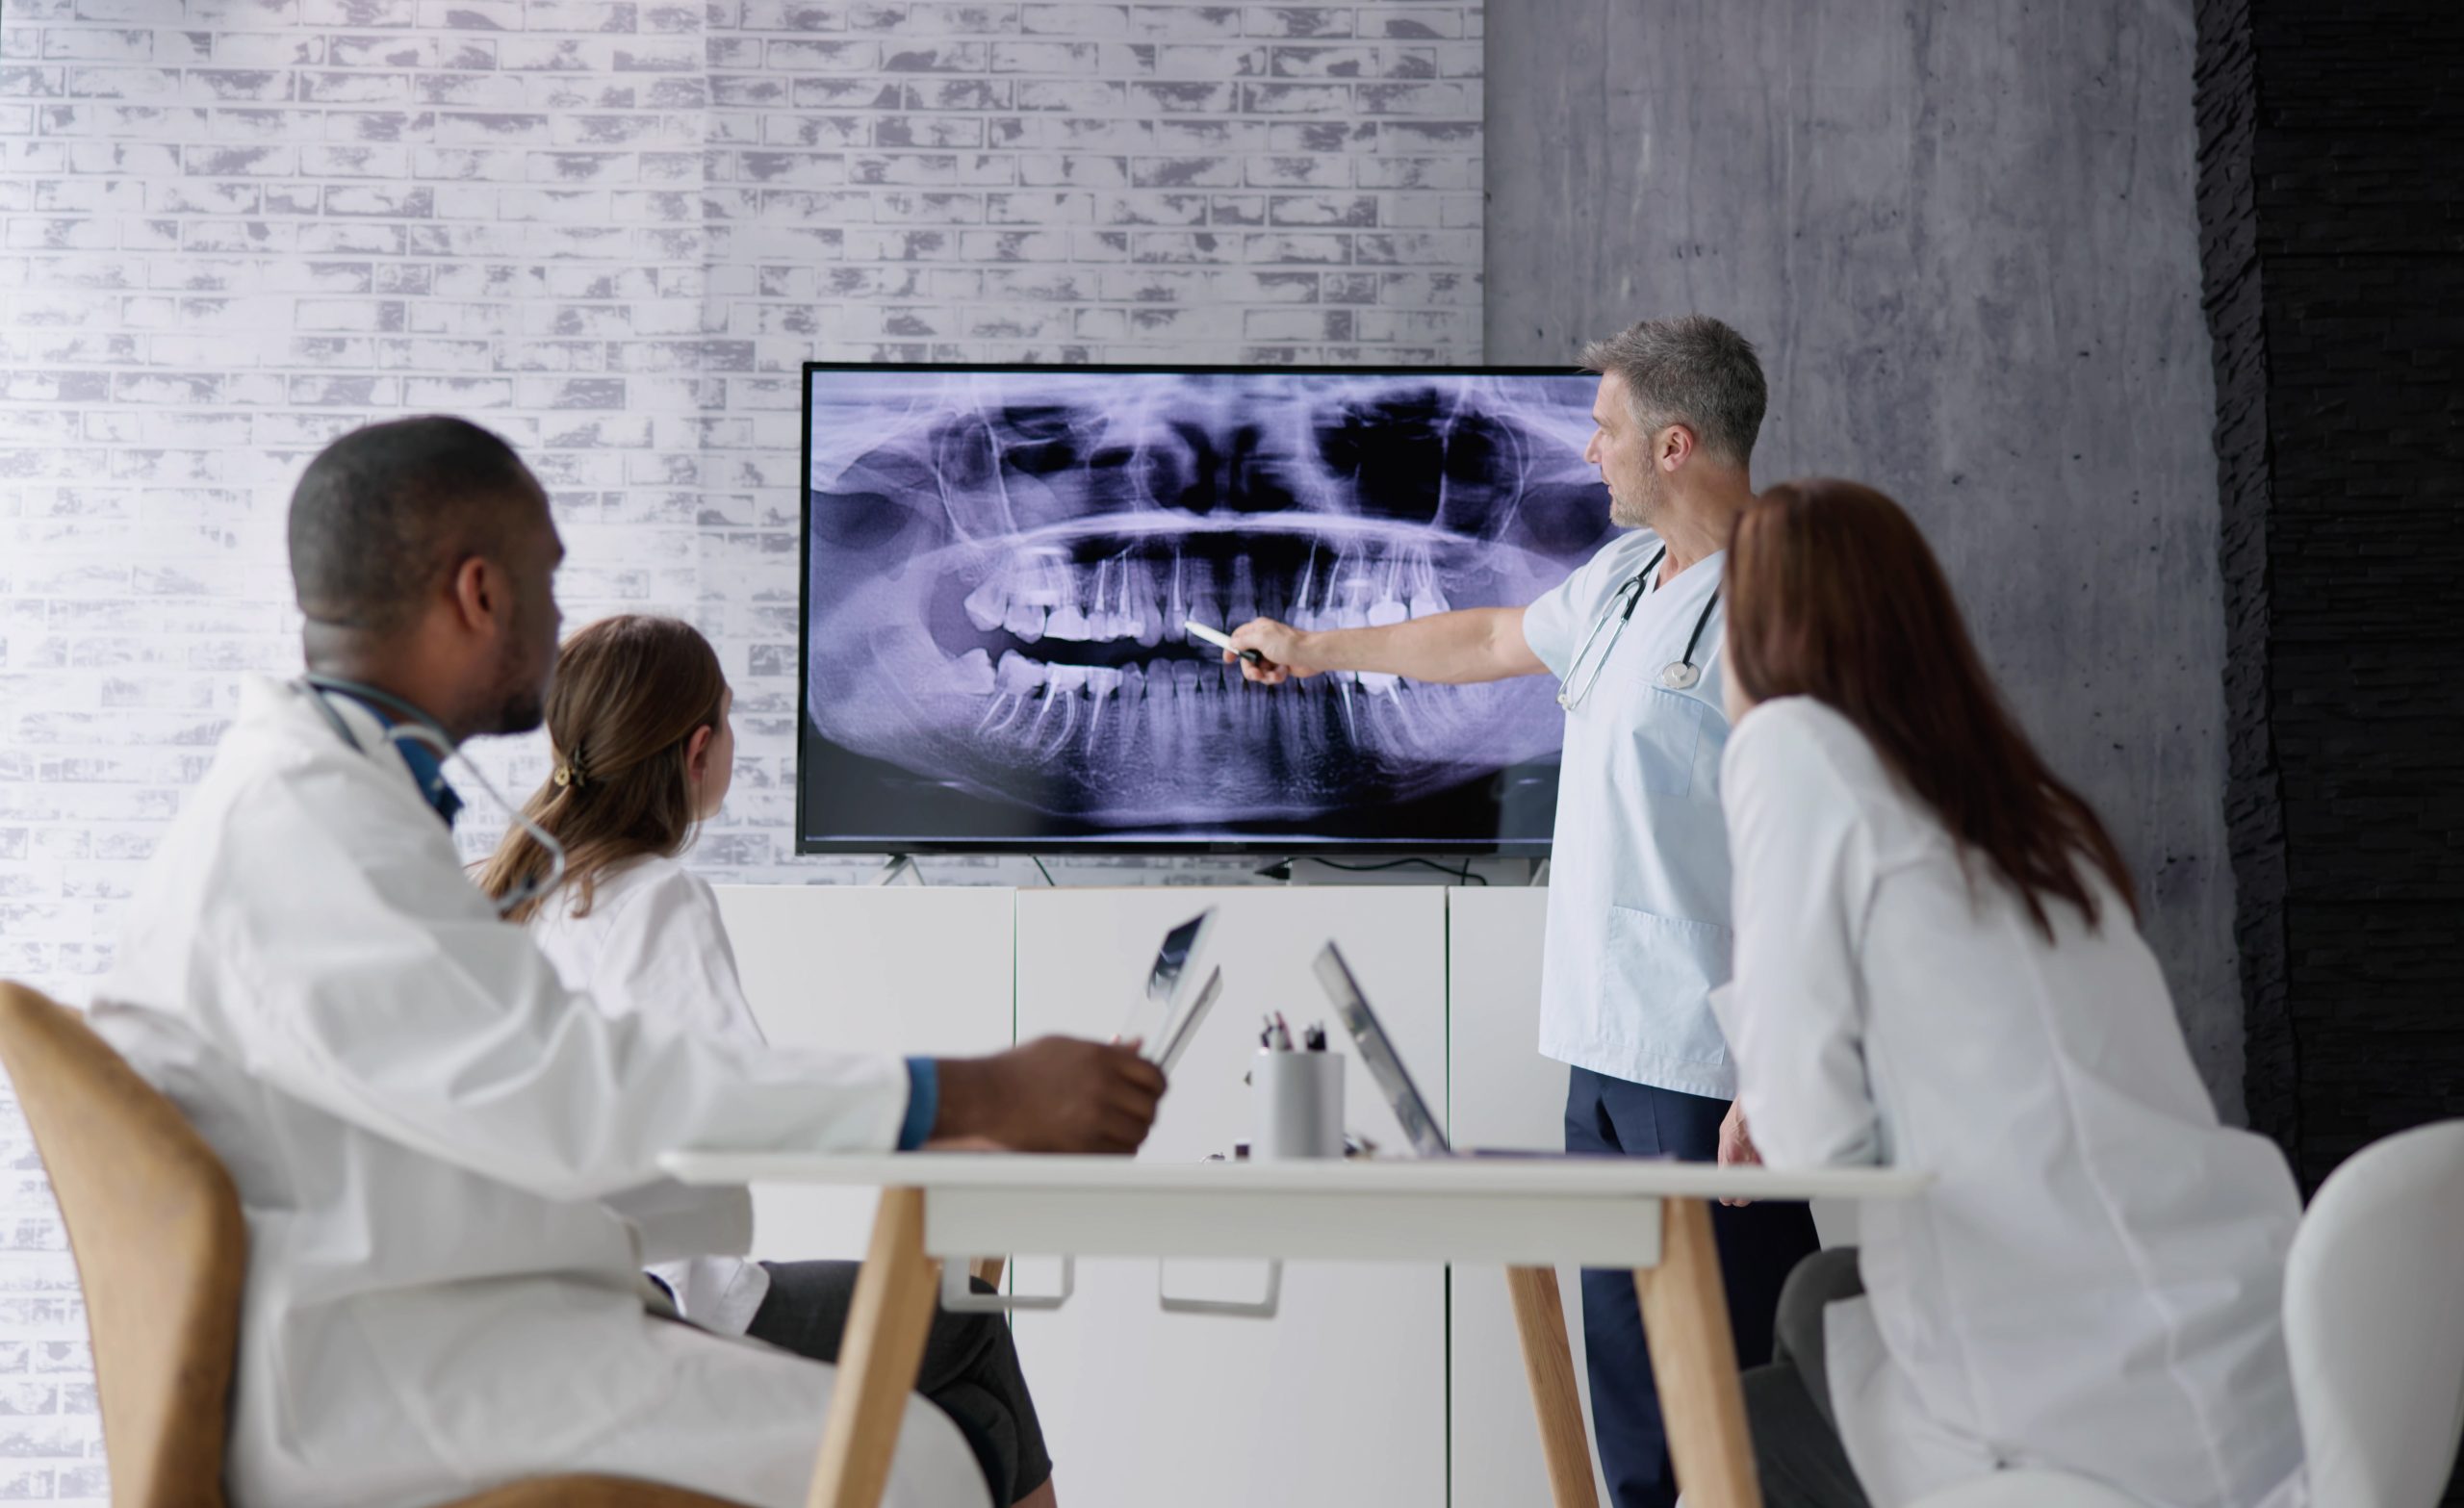 An oral medicine specialist stands in front of dental X-rays on a wall-mounted monitor, consulting with three medical colleagues.